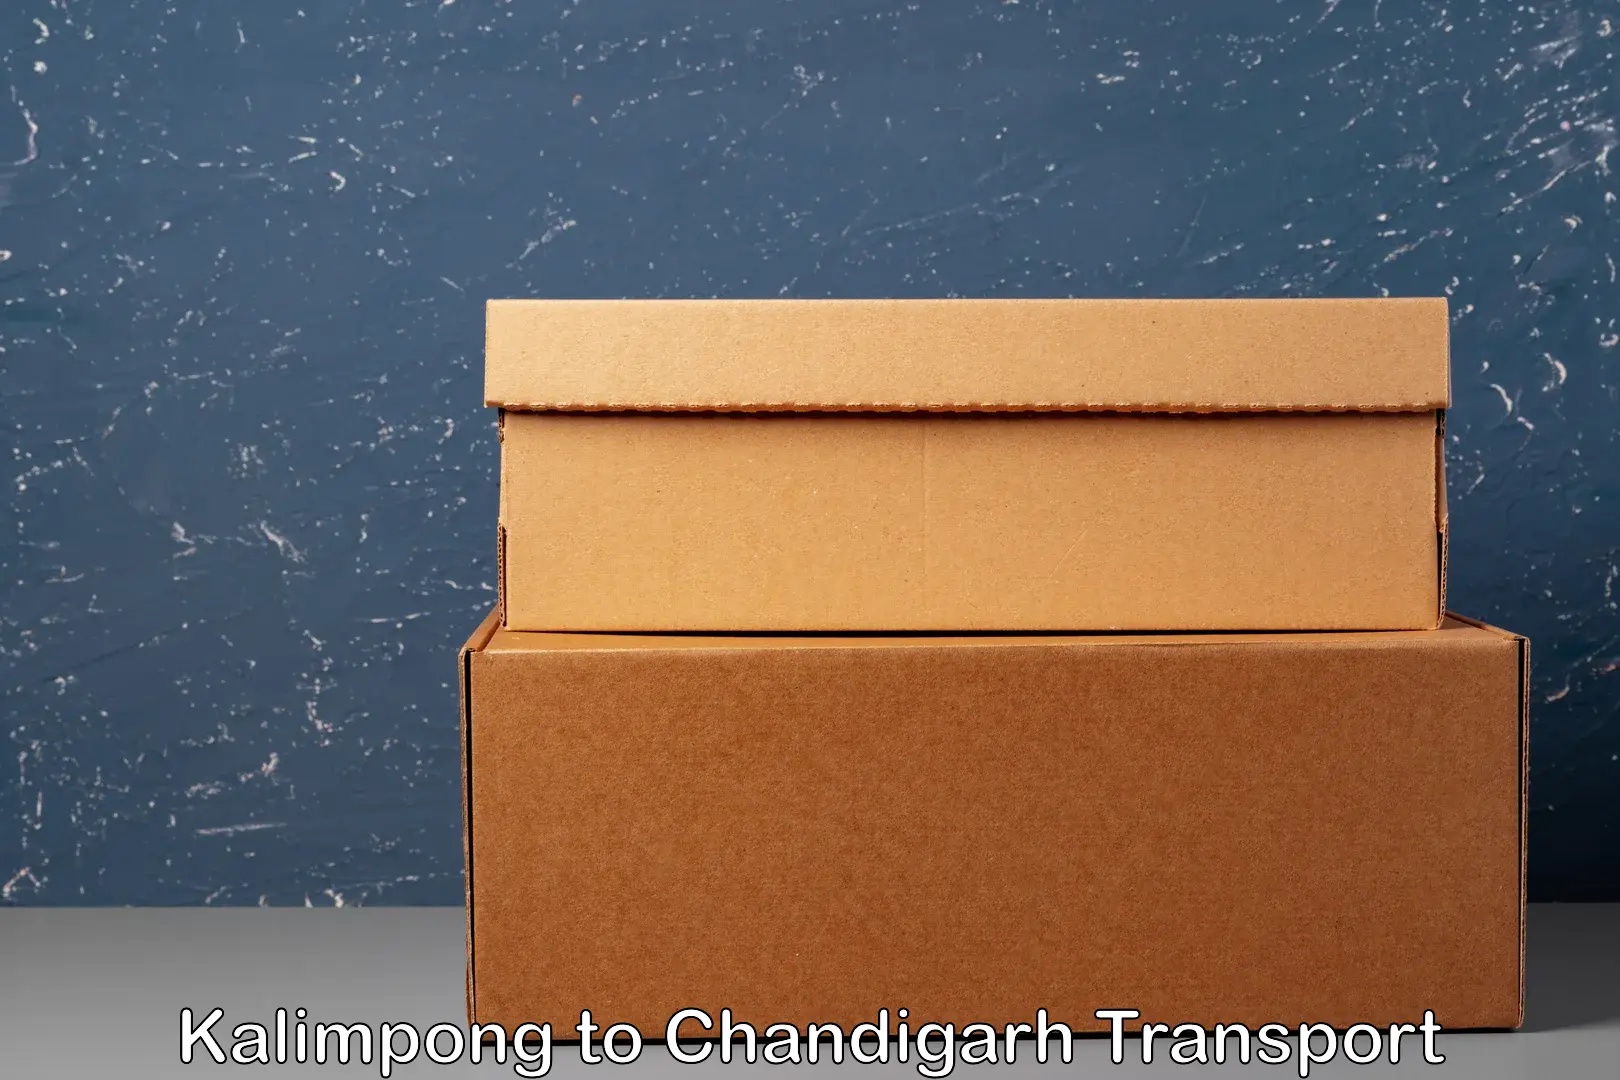 Road transport online services Kalimpong to Chandigarh